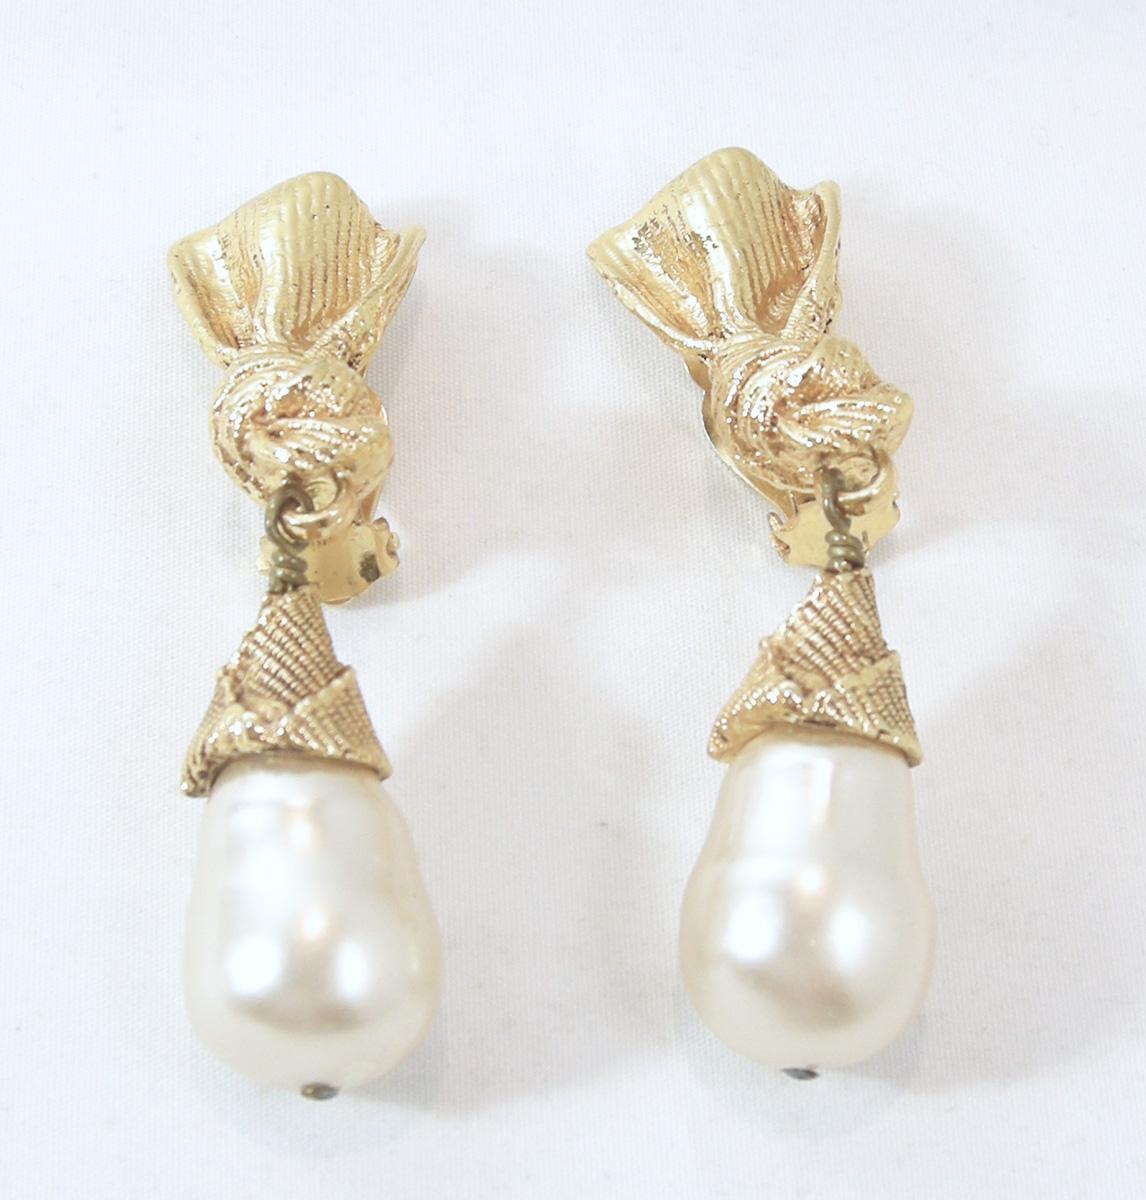 These beautiful clip faux pearl drop earrings are French and signed “Paris” in the back.  The gold tone top has a ribbon design that has a knot at the bottom, which connects to a capped faux baroque pearl. They measure 2-5/8” long x 3/4